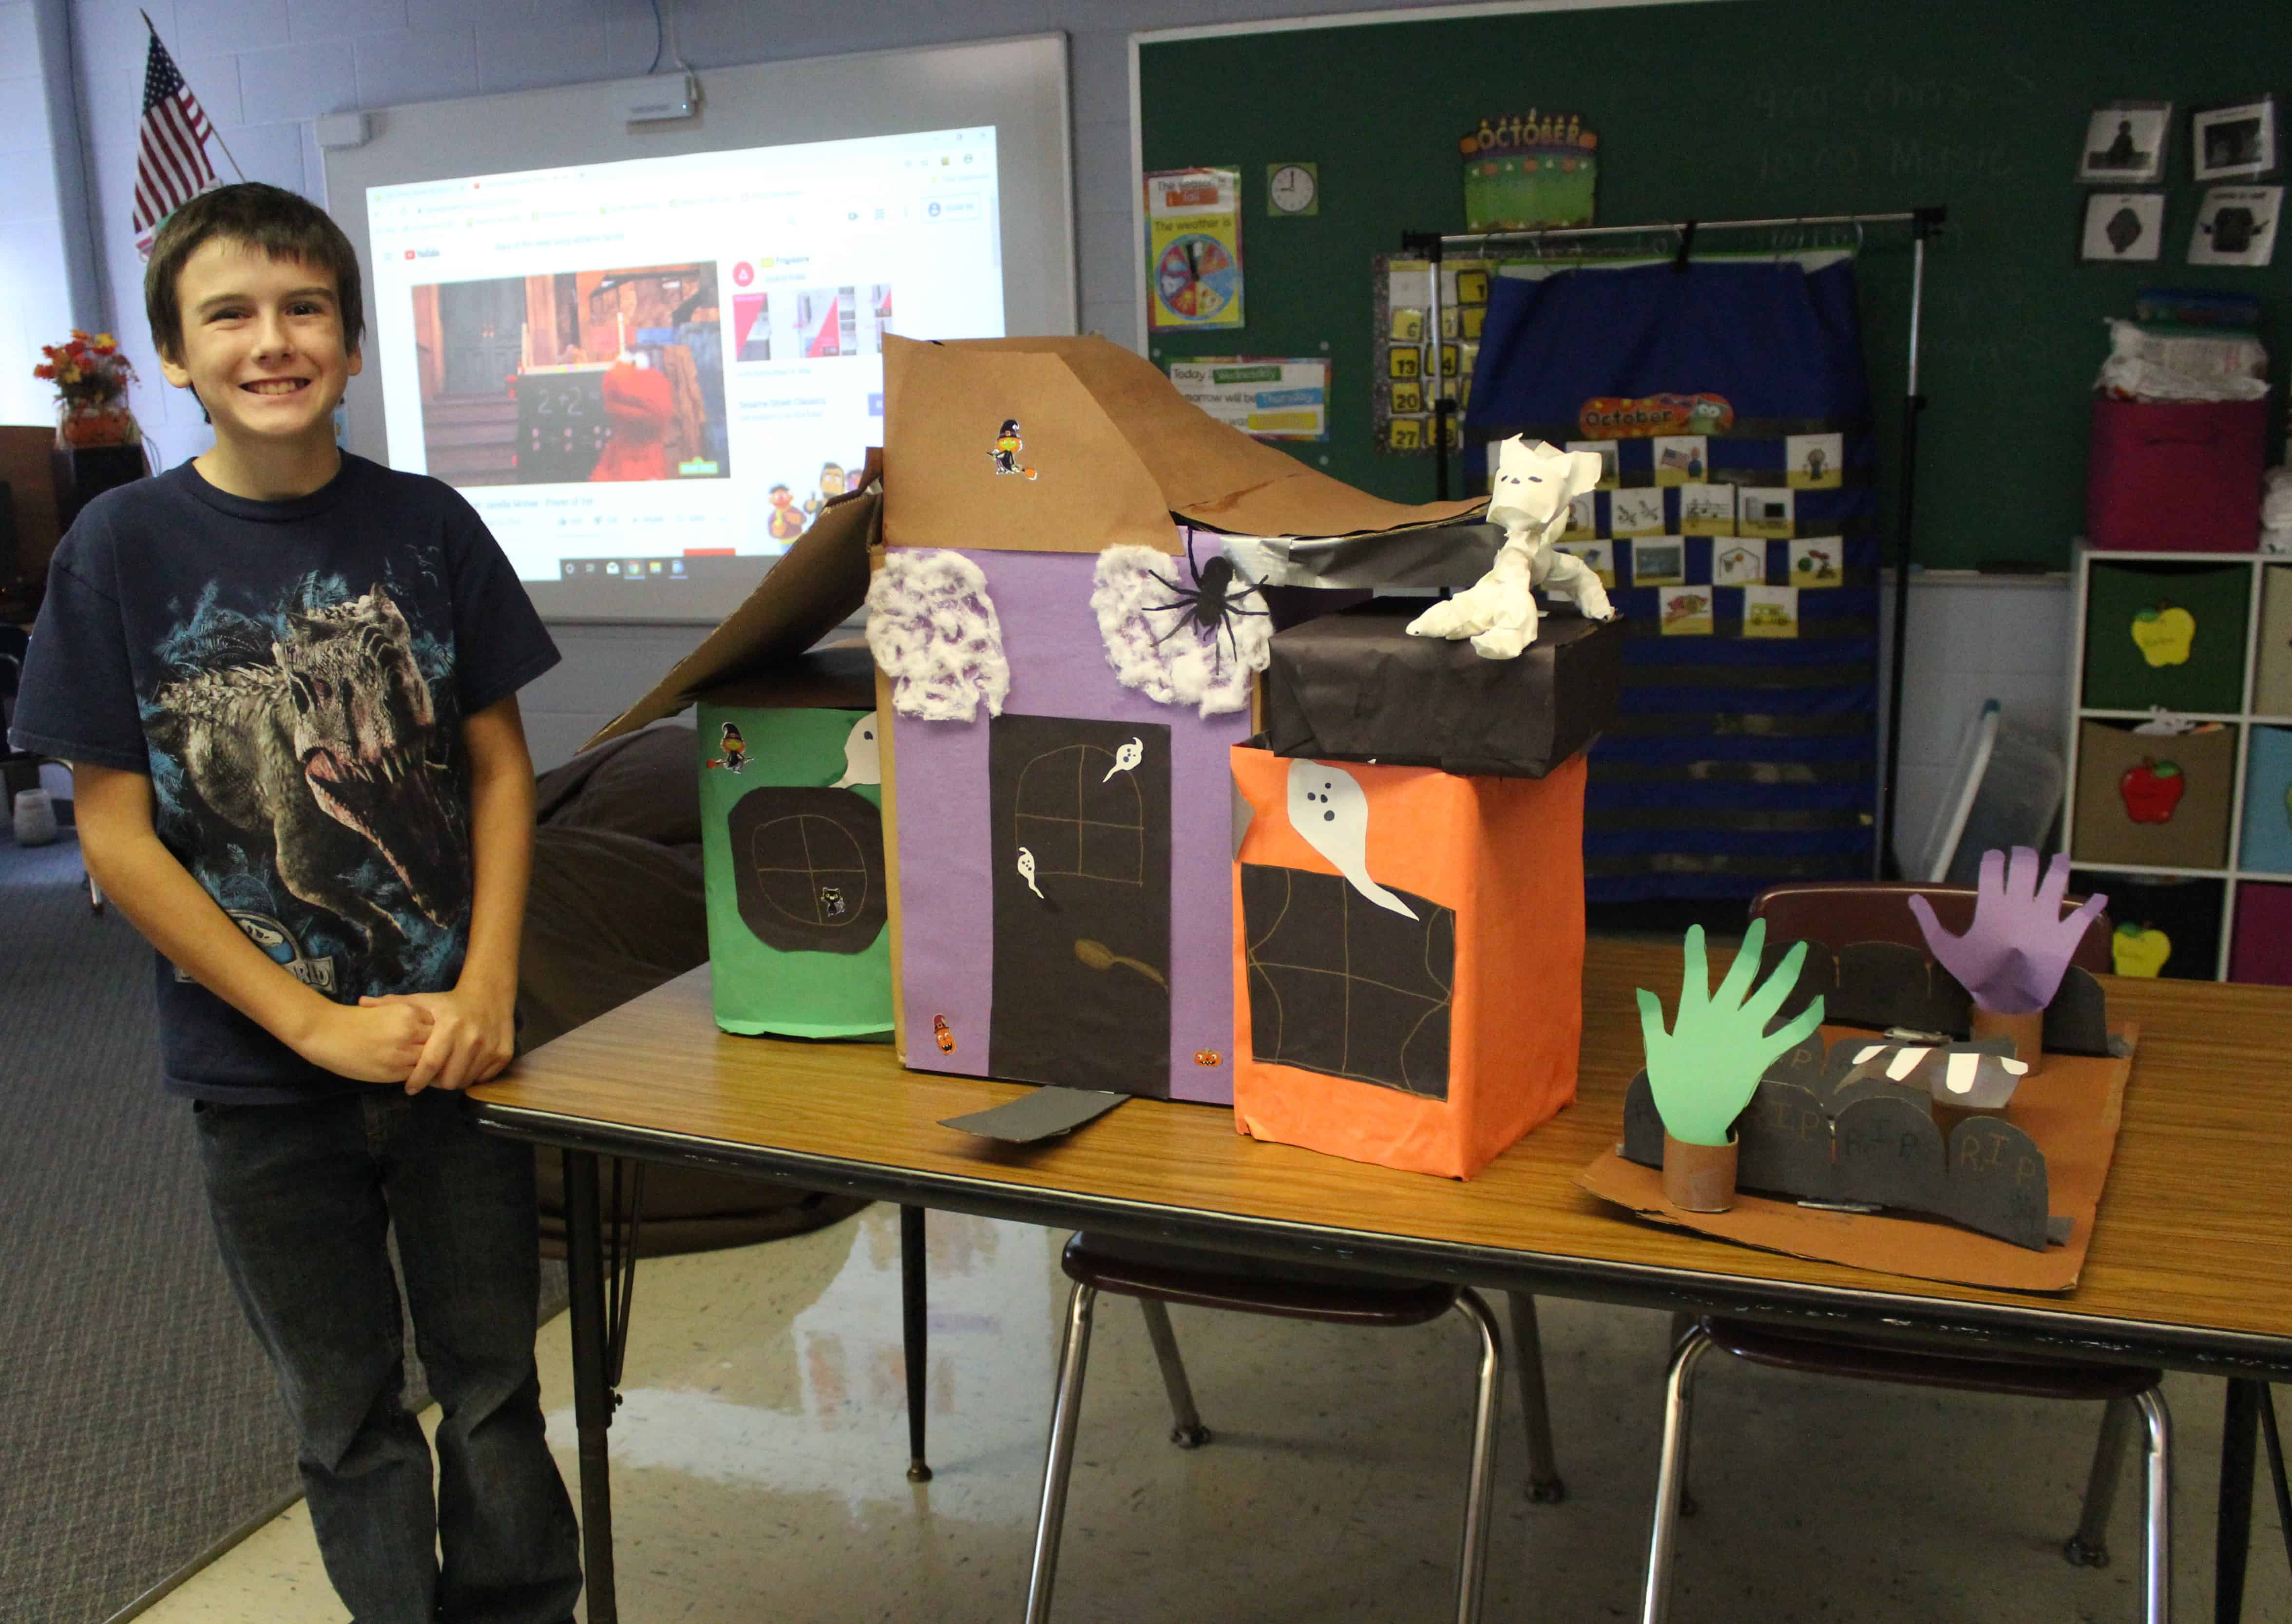 Pictured is 11-year-old student Jordan Bennett with the creation.